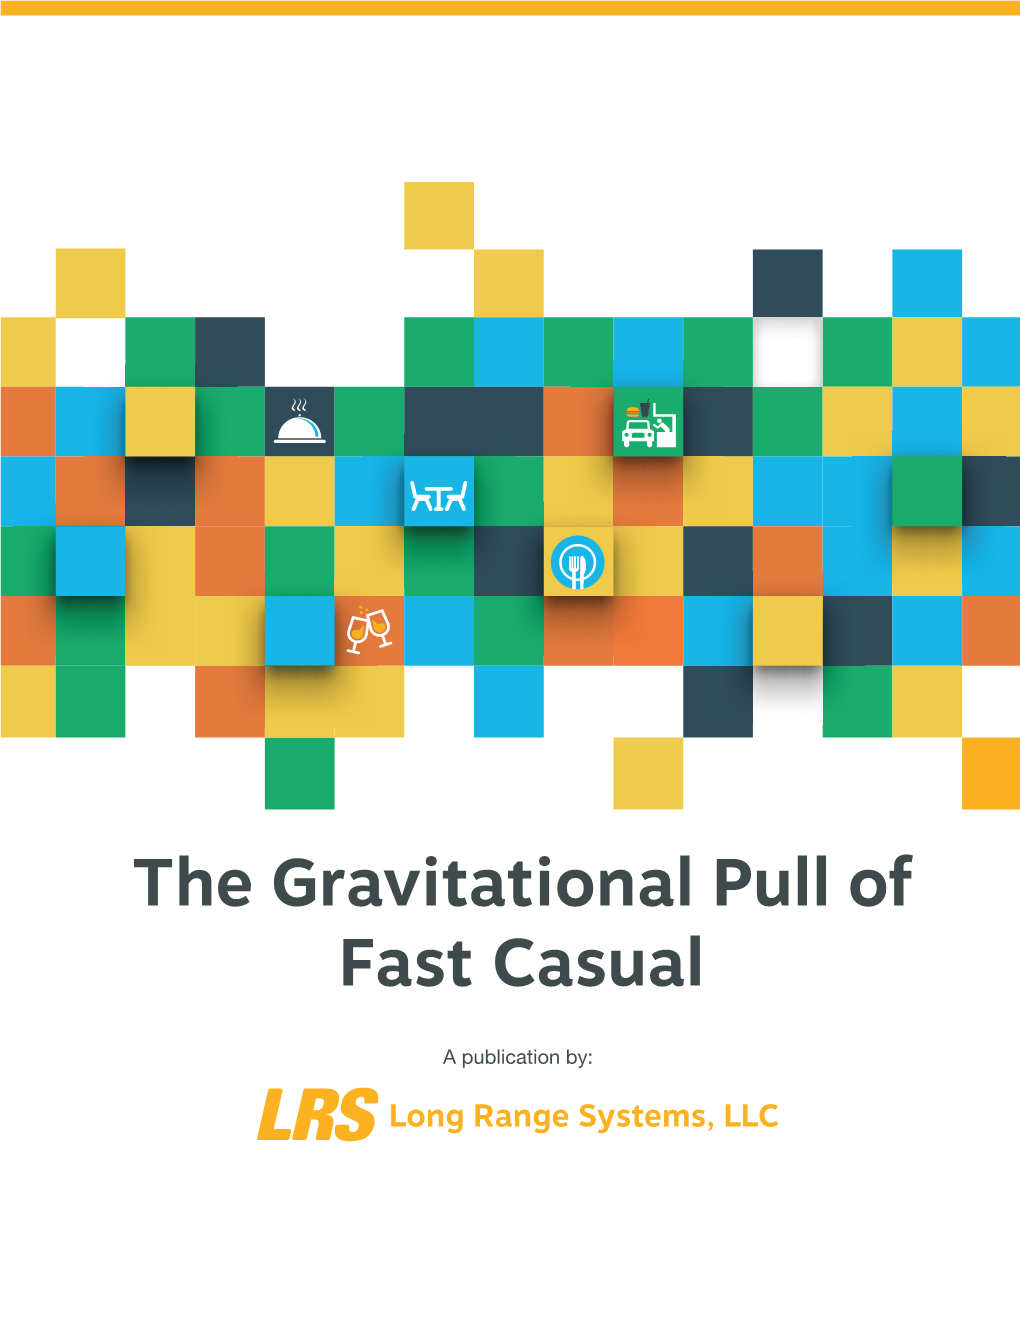 The Gravitational Pull of Fast Casual